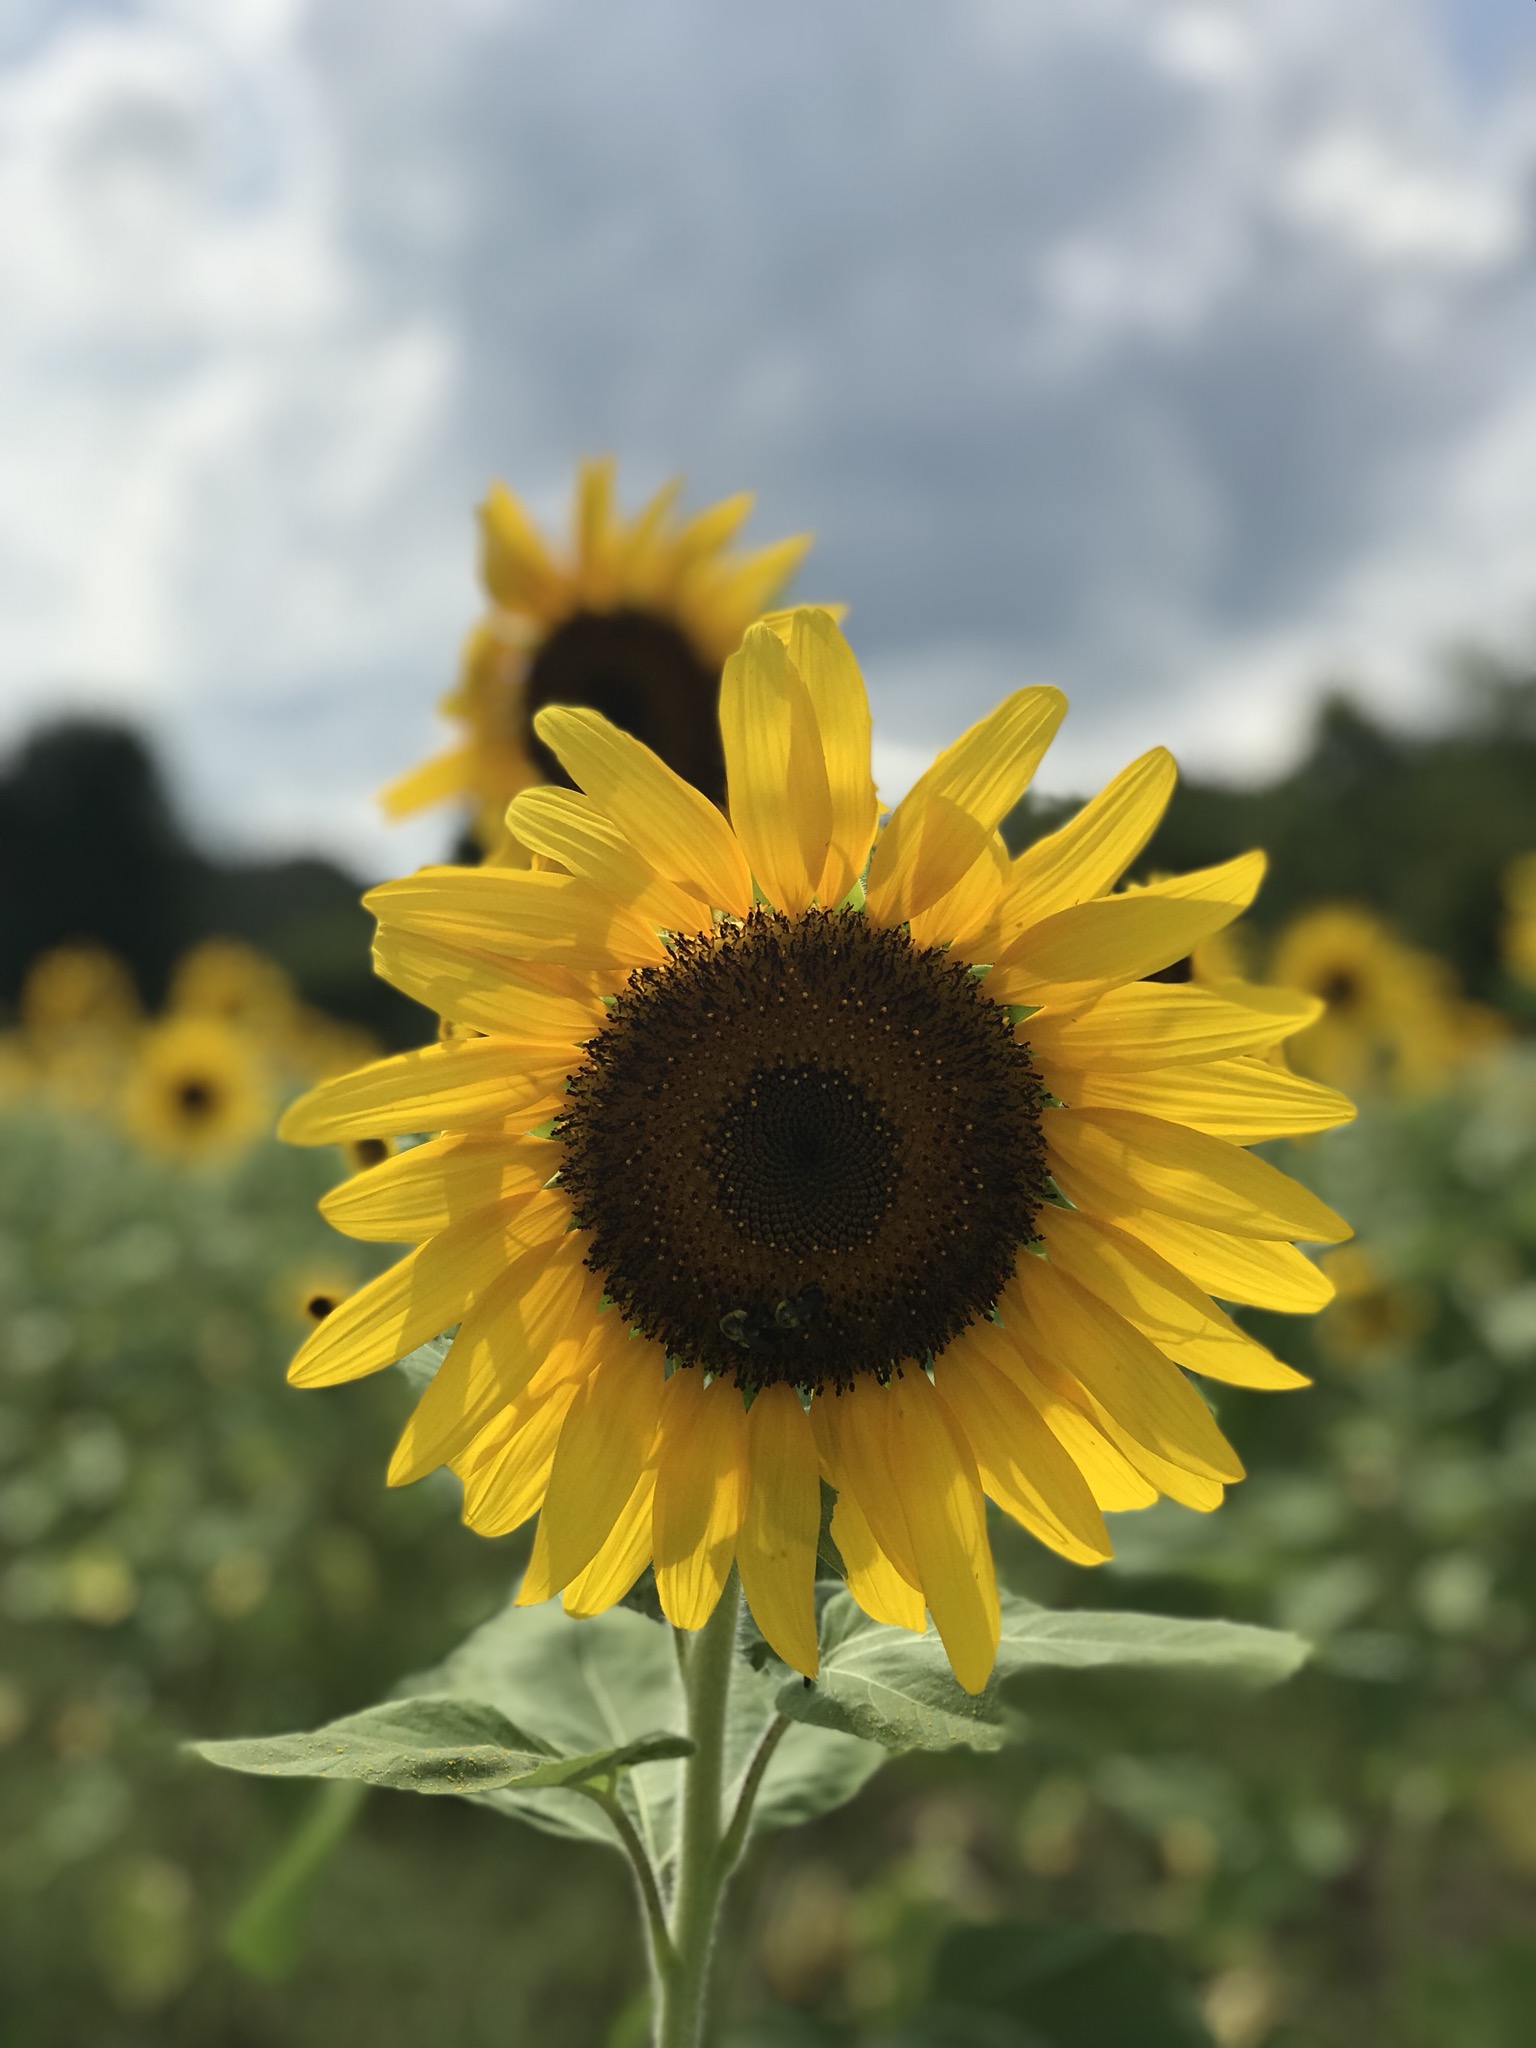 Sunflowers Picking & Thoughts on Self-Care